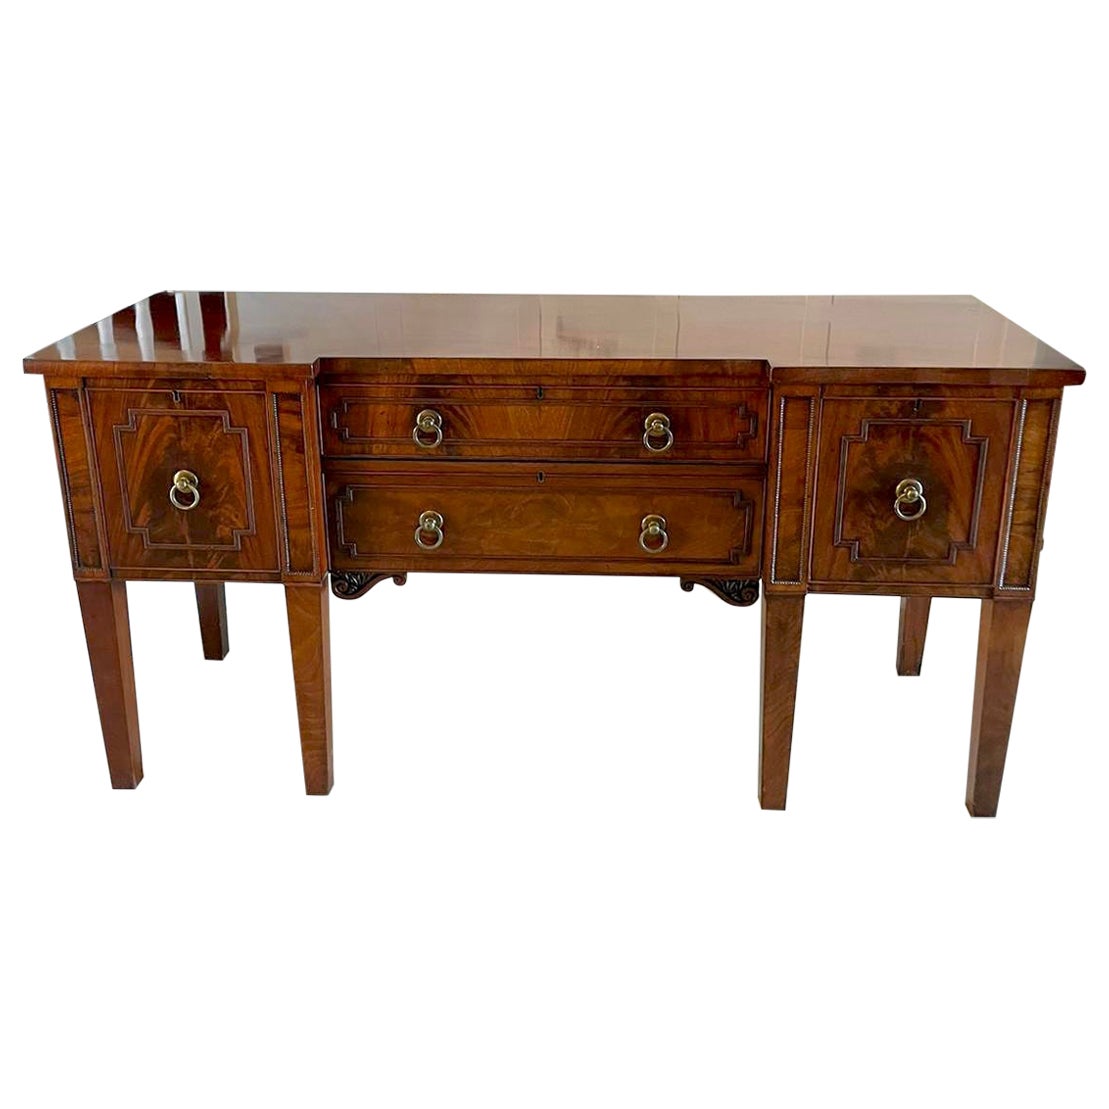 Superior Quality Antique Regency Mahogany Sideboard For Sale